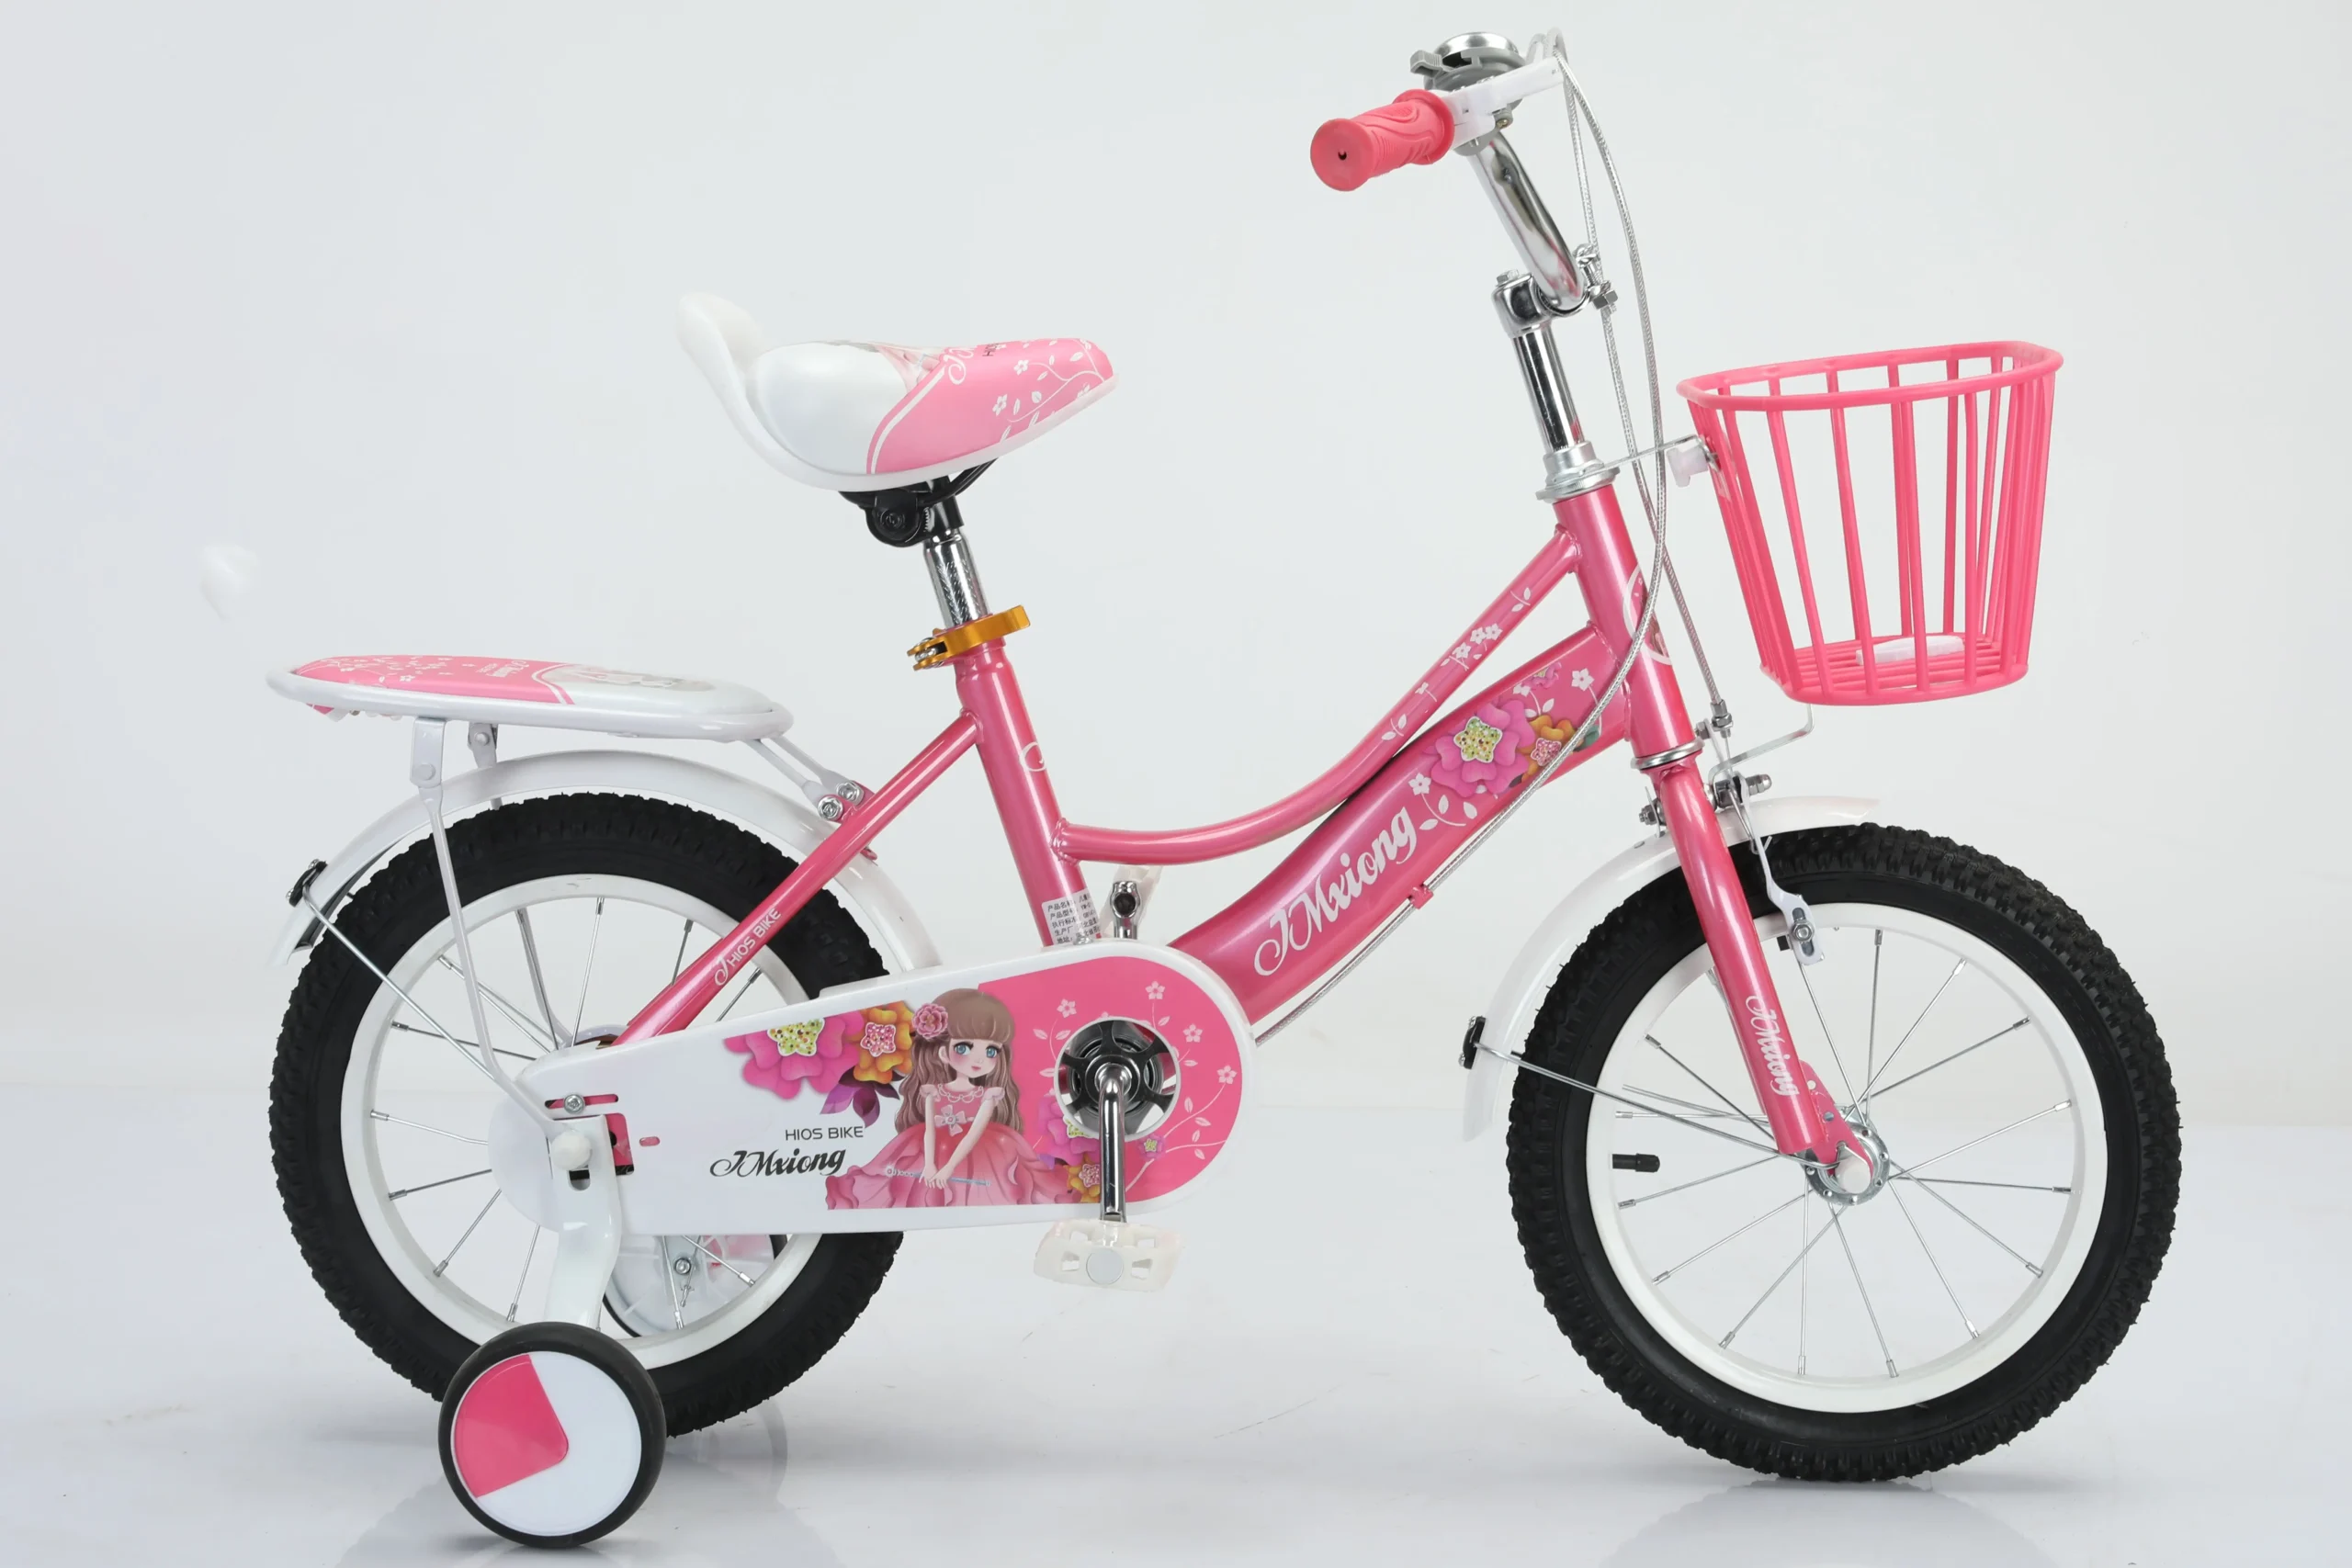 Bicycle for children from 4 to 6 years old/children bicycle for 10 years